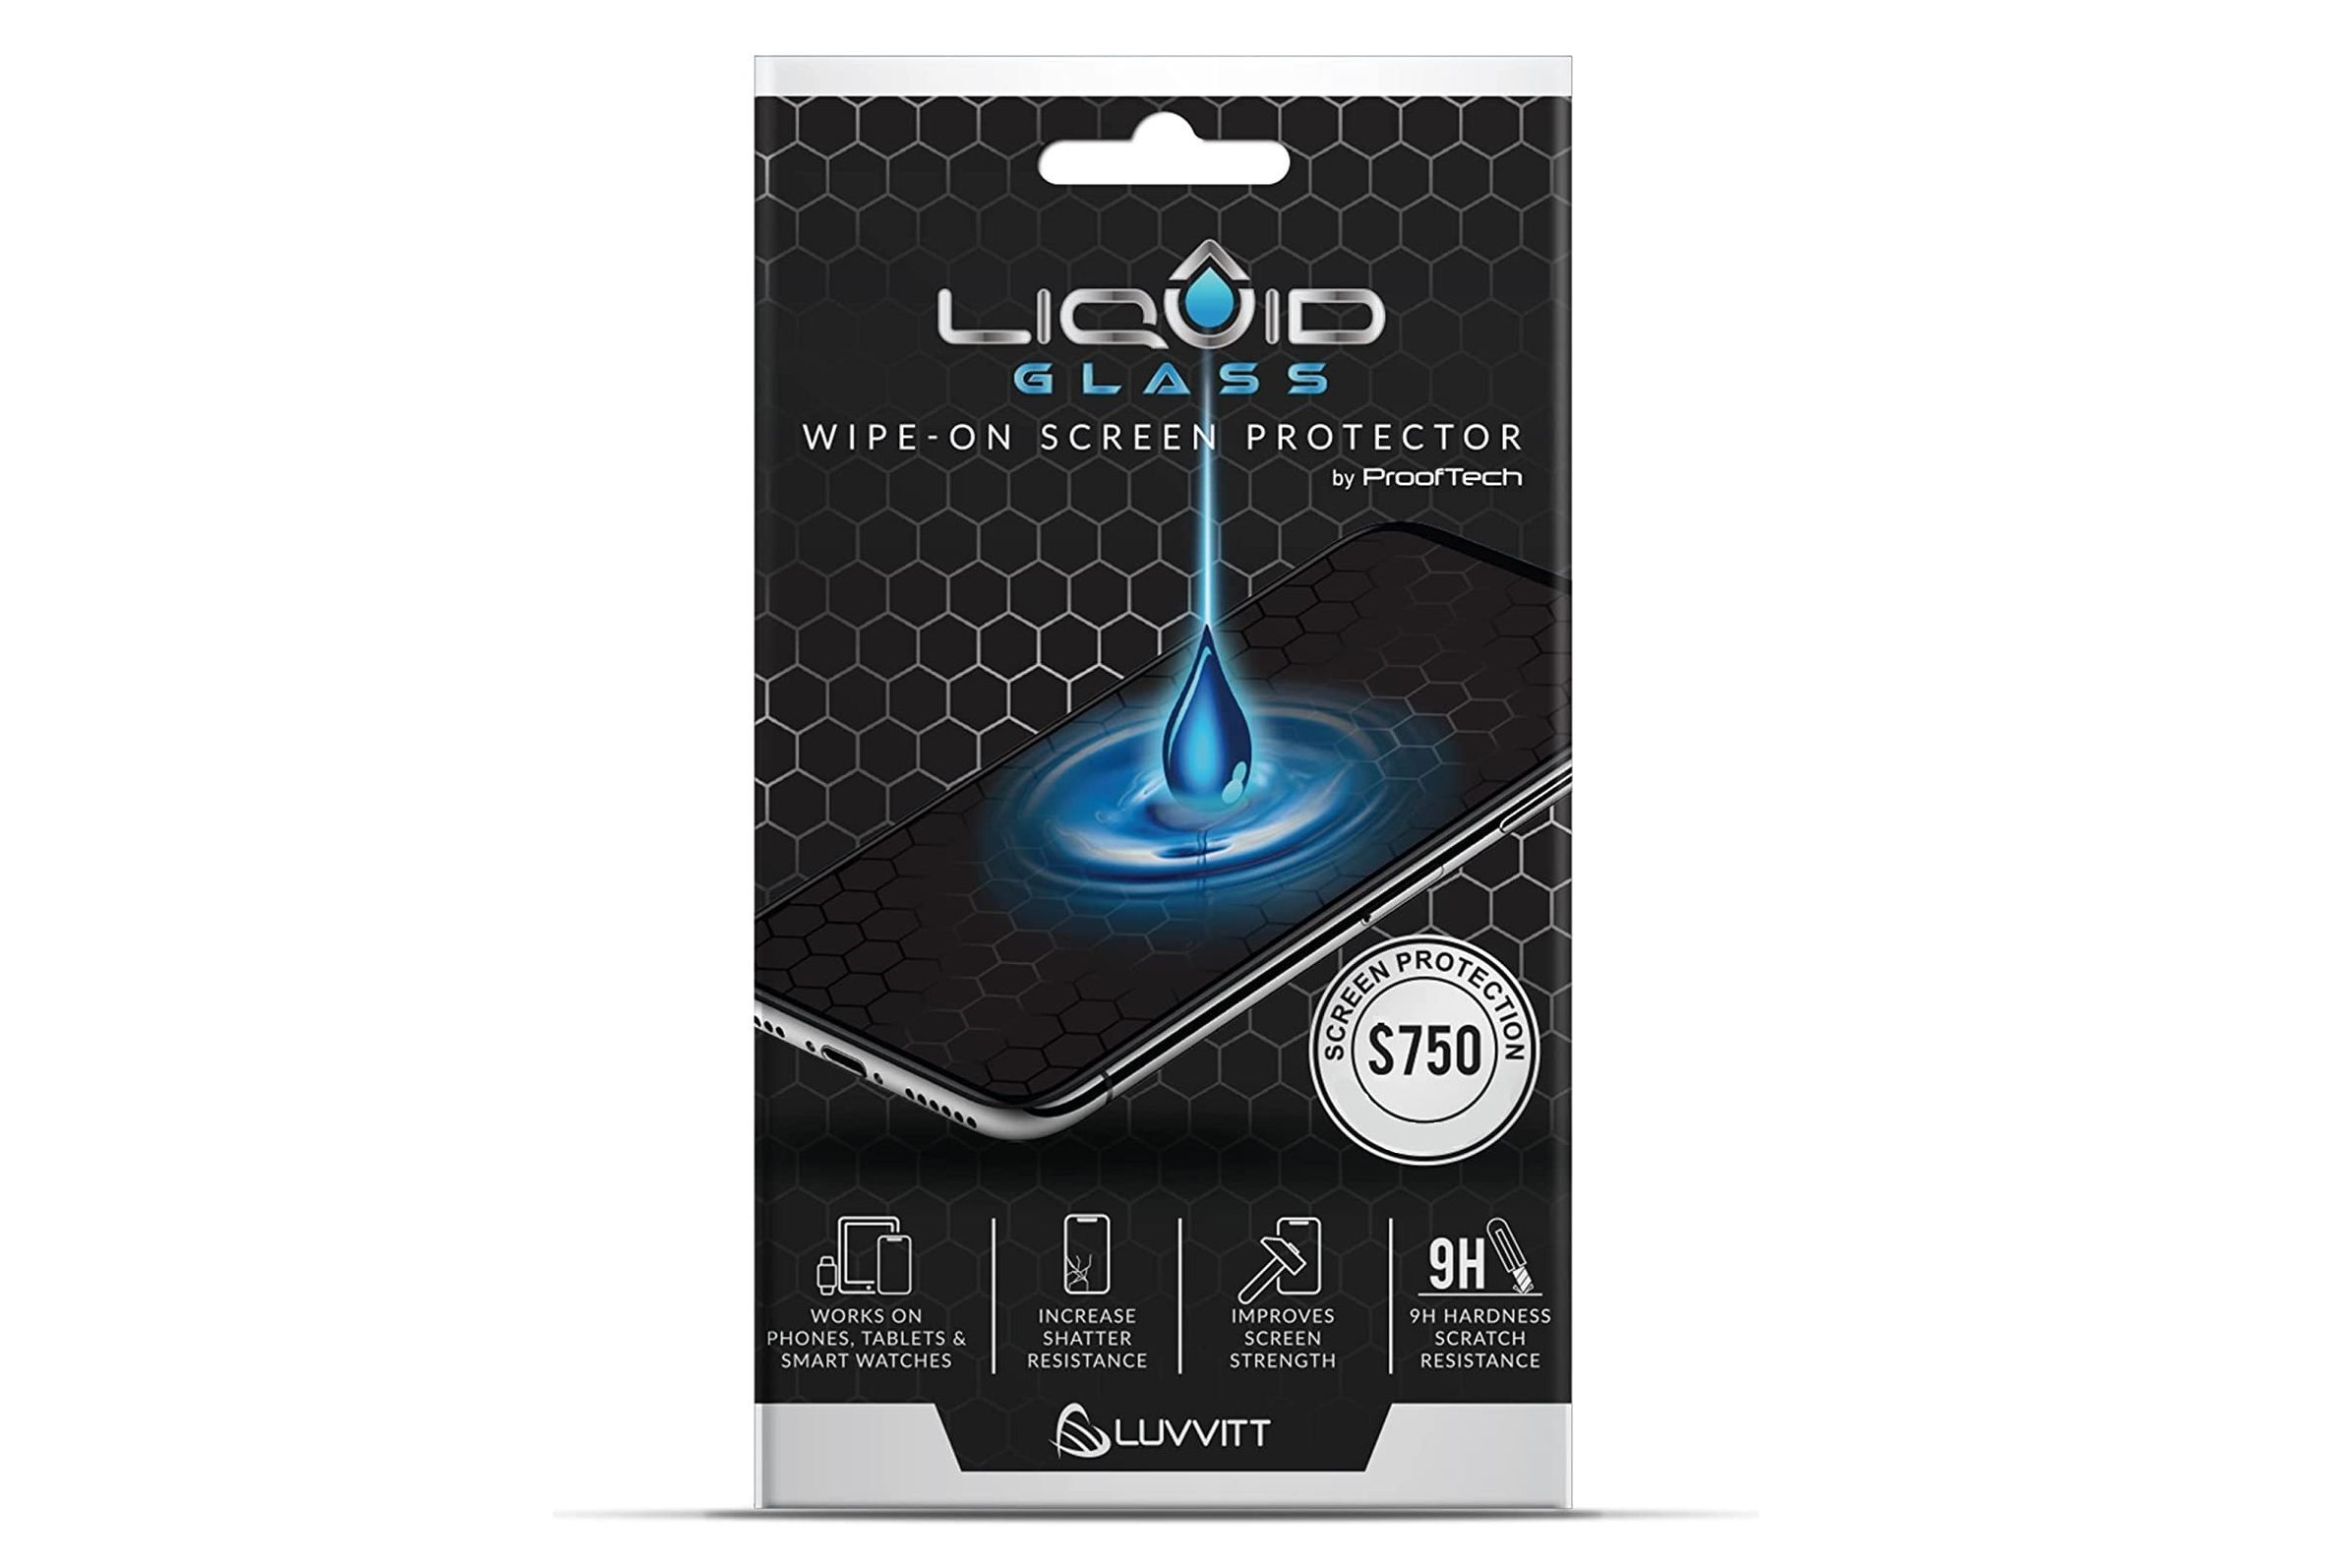 LIQUID GLASS Screen Protector with $750 Coverage - Best Samsung Galaxy S22 Plus screen protectors - get some protection now!